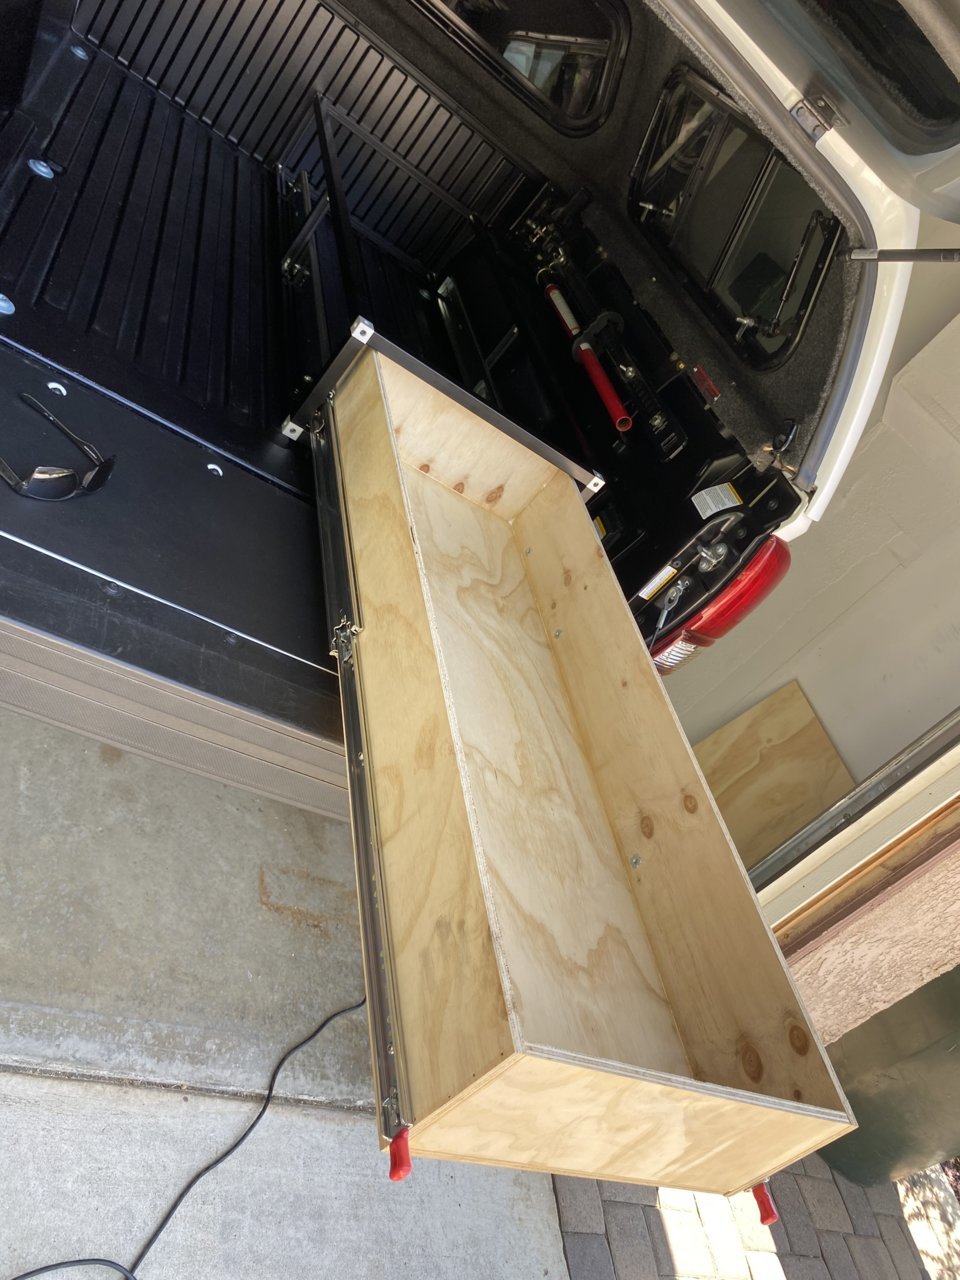 It's a good idea to DIY RV Slide Out Storage Trays - Vadania